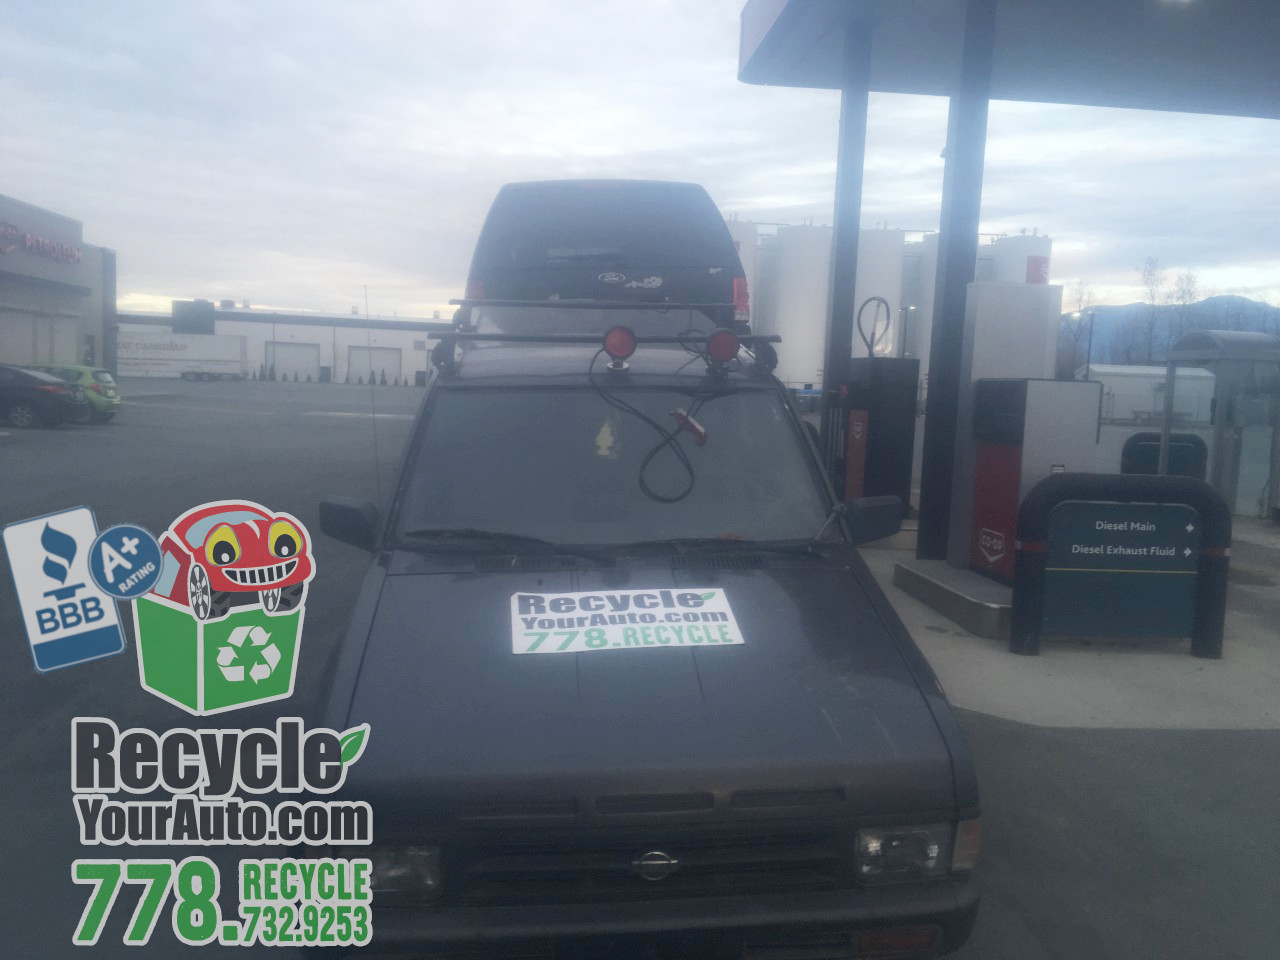 Recycle Your Auto - Towing and Scrap Car Removal | 264 St, Aldergrove, BC V4W 2V5 | +1 778-732-9253